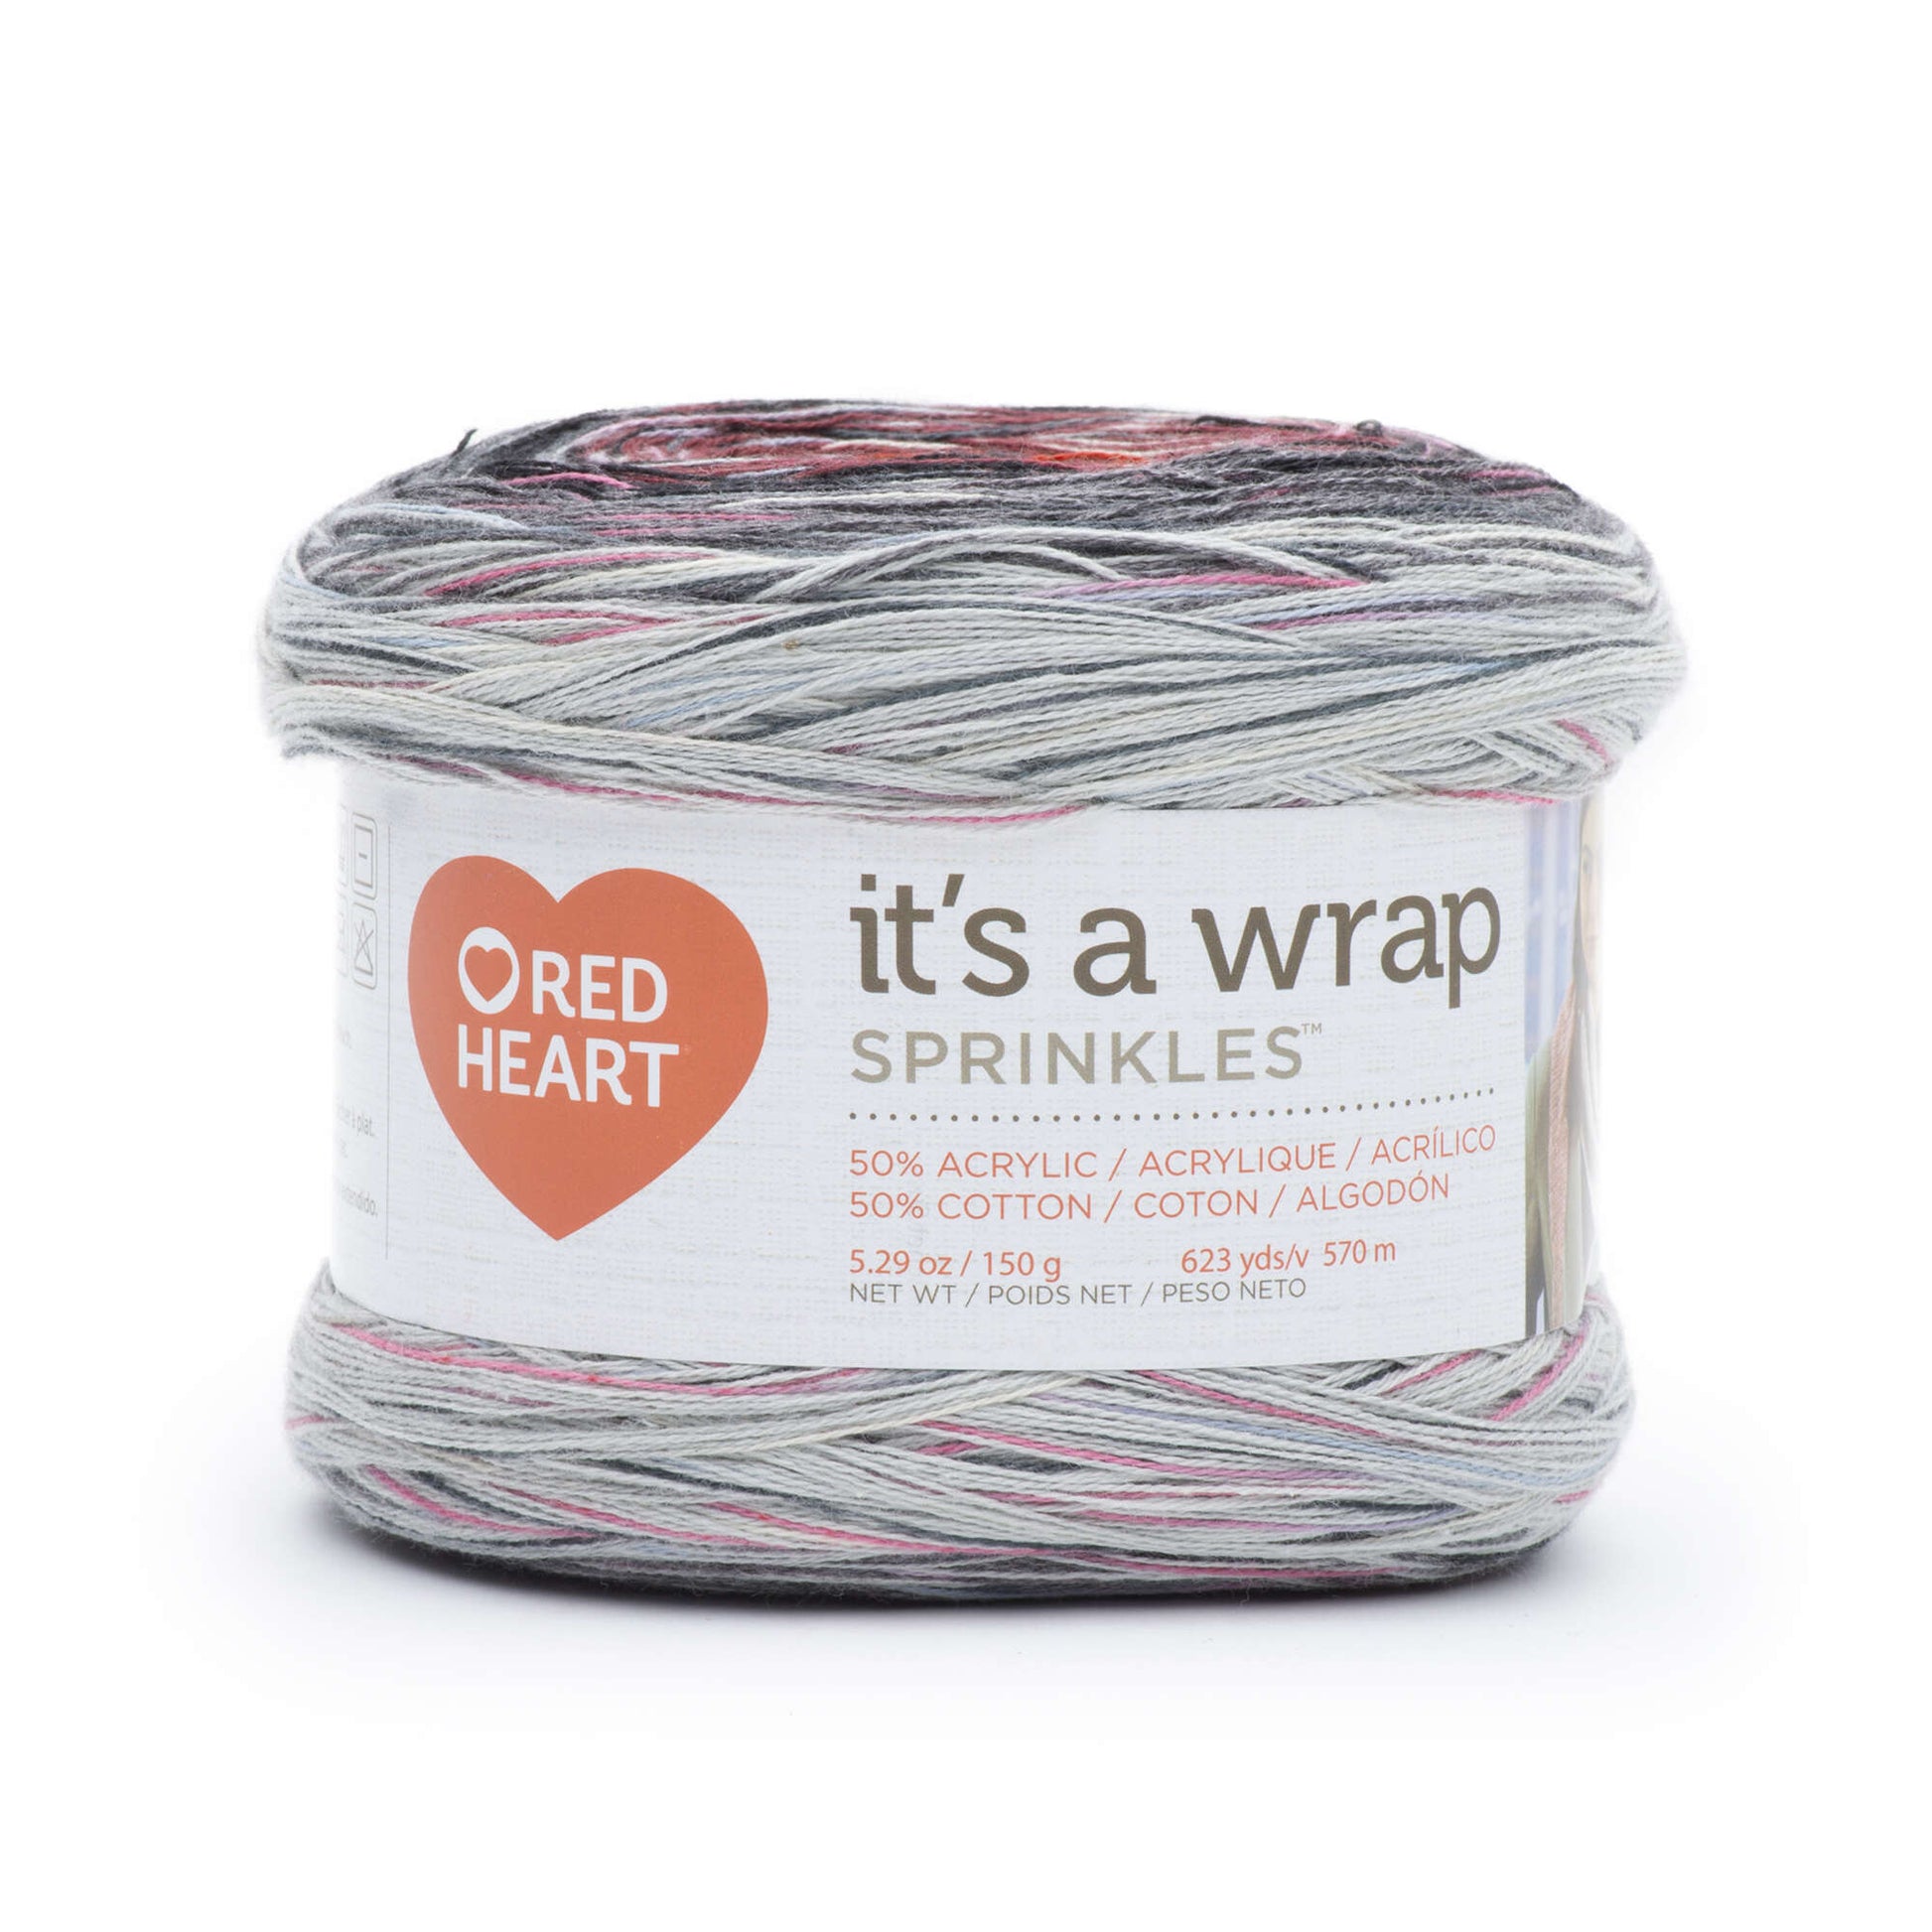 Red Heart It's a Wrap Sprinkles Yarn (150G/5.3oz) - Discontinued shades